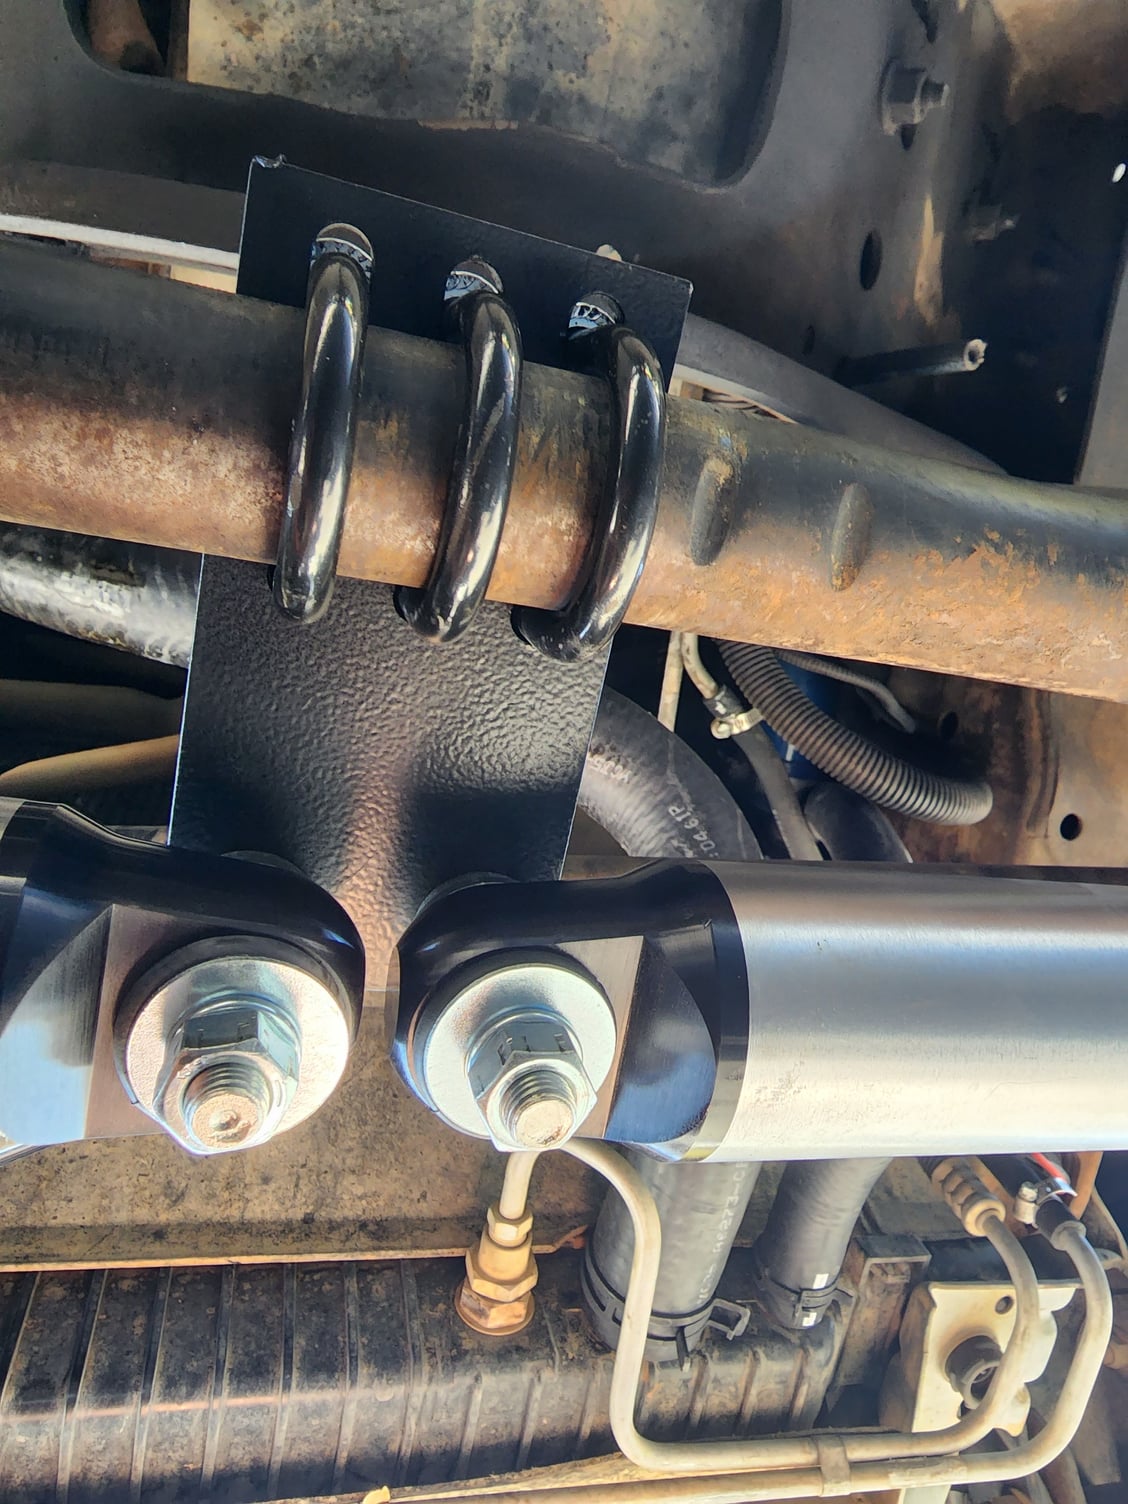 Dual steering stabilizer anyone? - Page 2 - Ford Truck Enthusiasts Forums